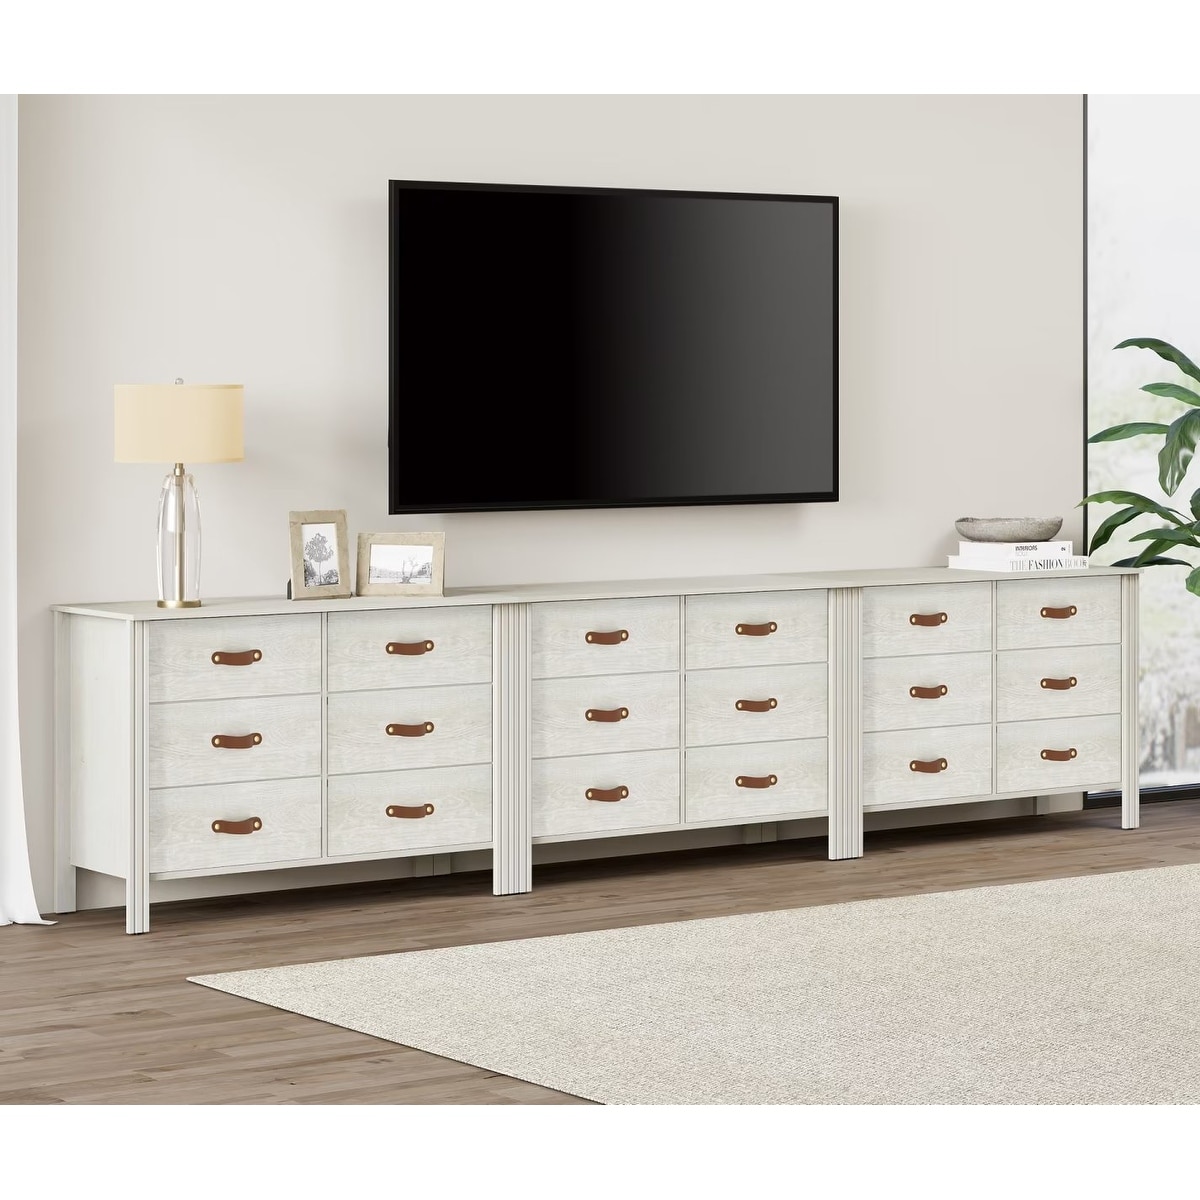 Dresser Tv Stand With Drawer  Classic Tv Console Table For Living Room